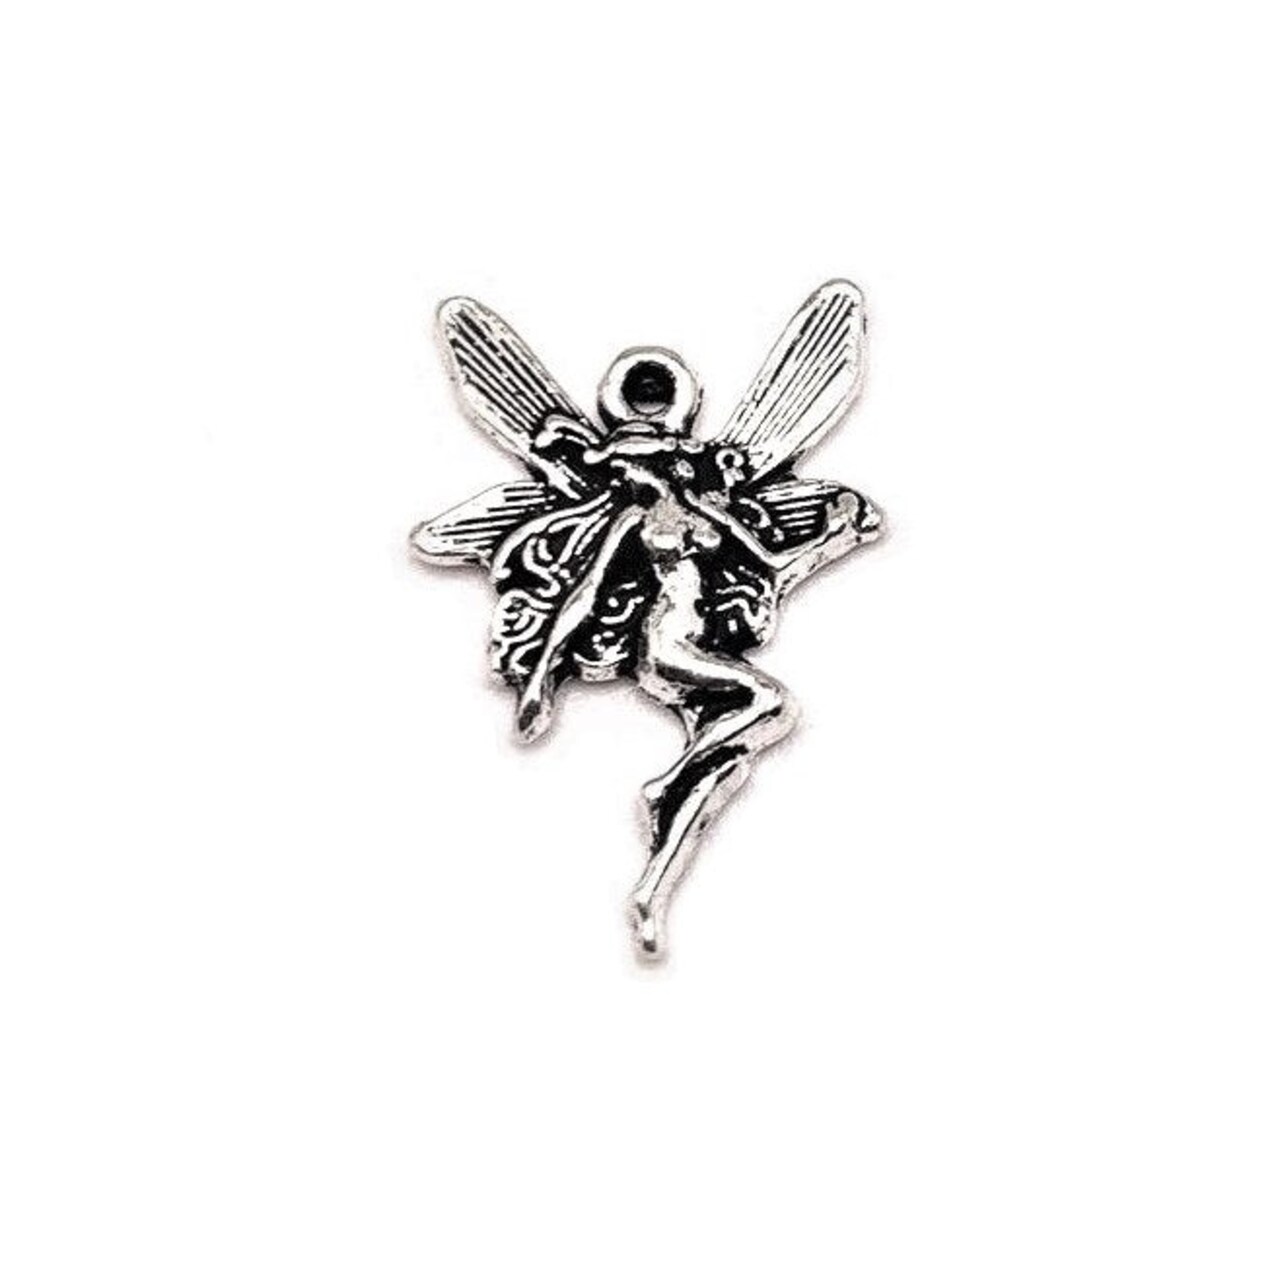 4, 20 or 50 Pieces: Silver Fairy Sprite Charms